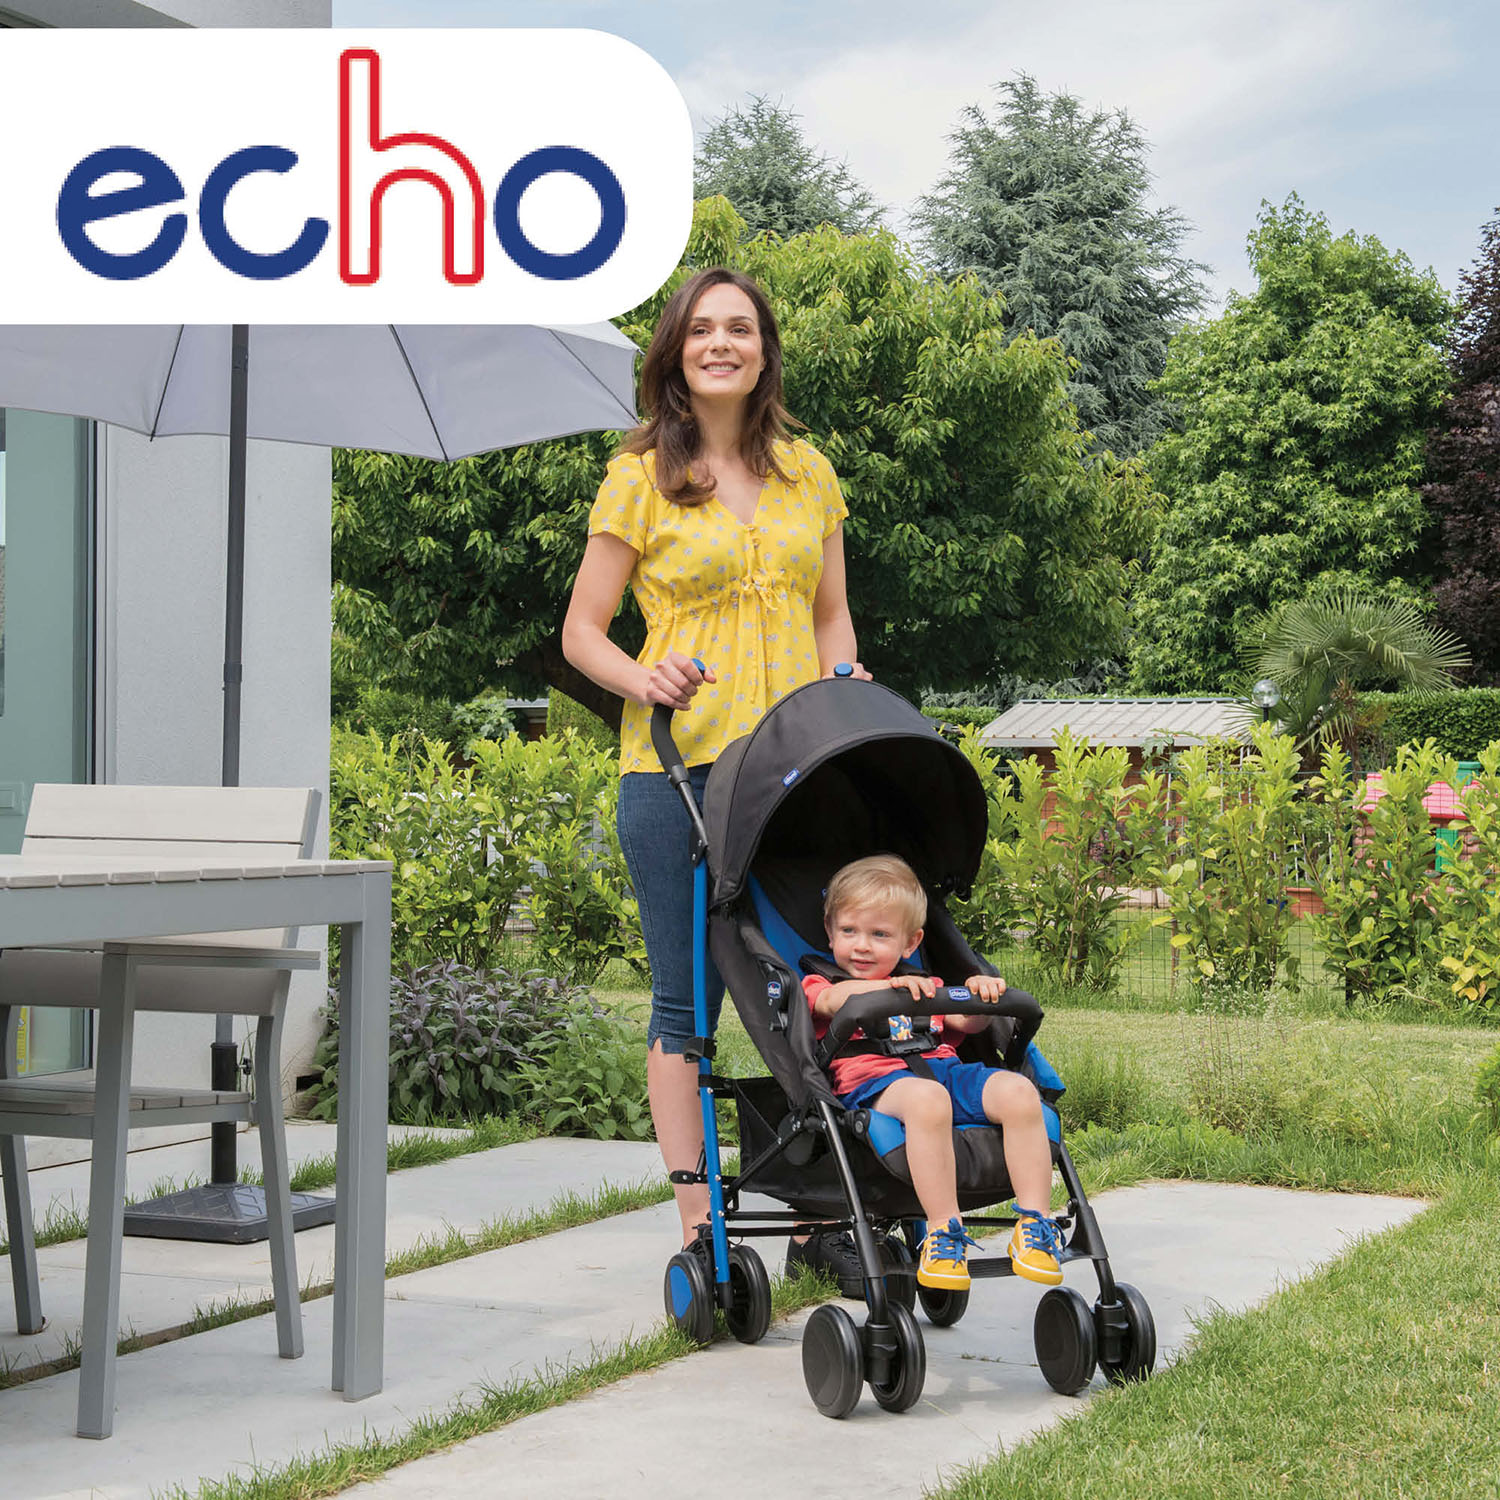 Chicco Echo Stroller - What's Instore